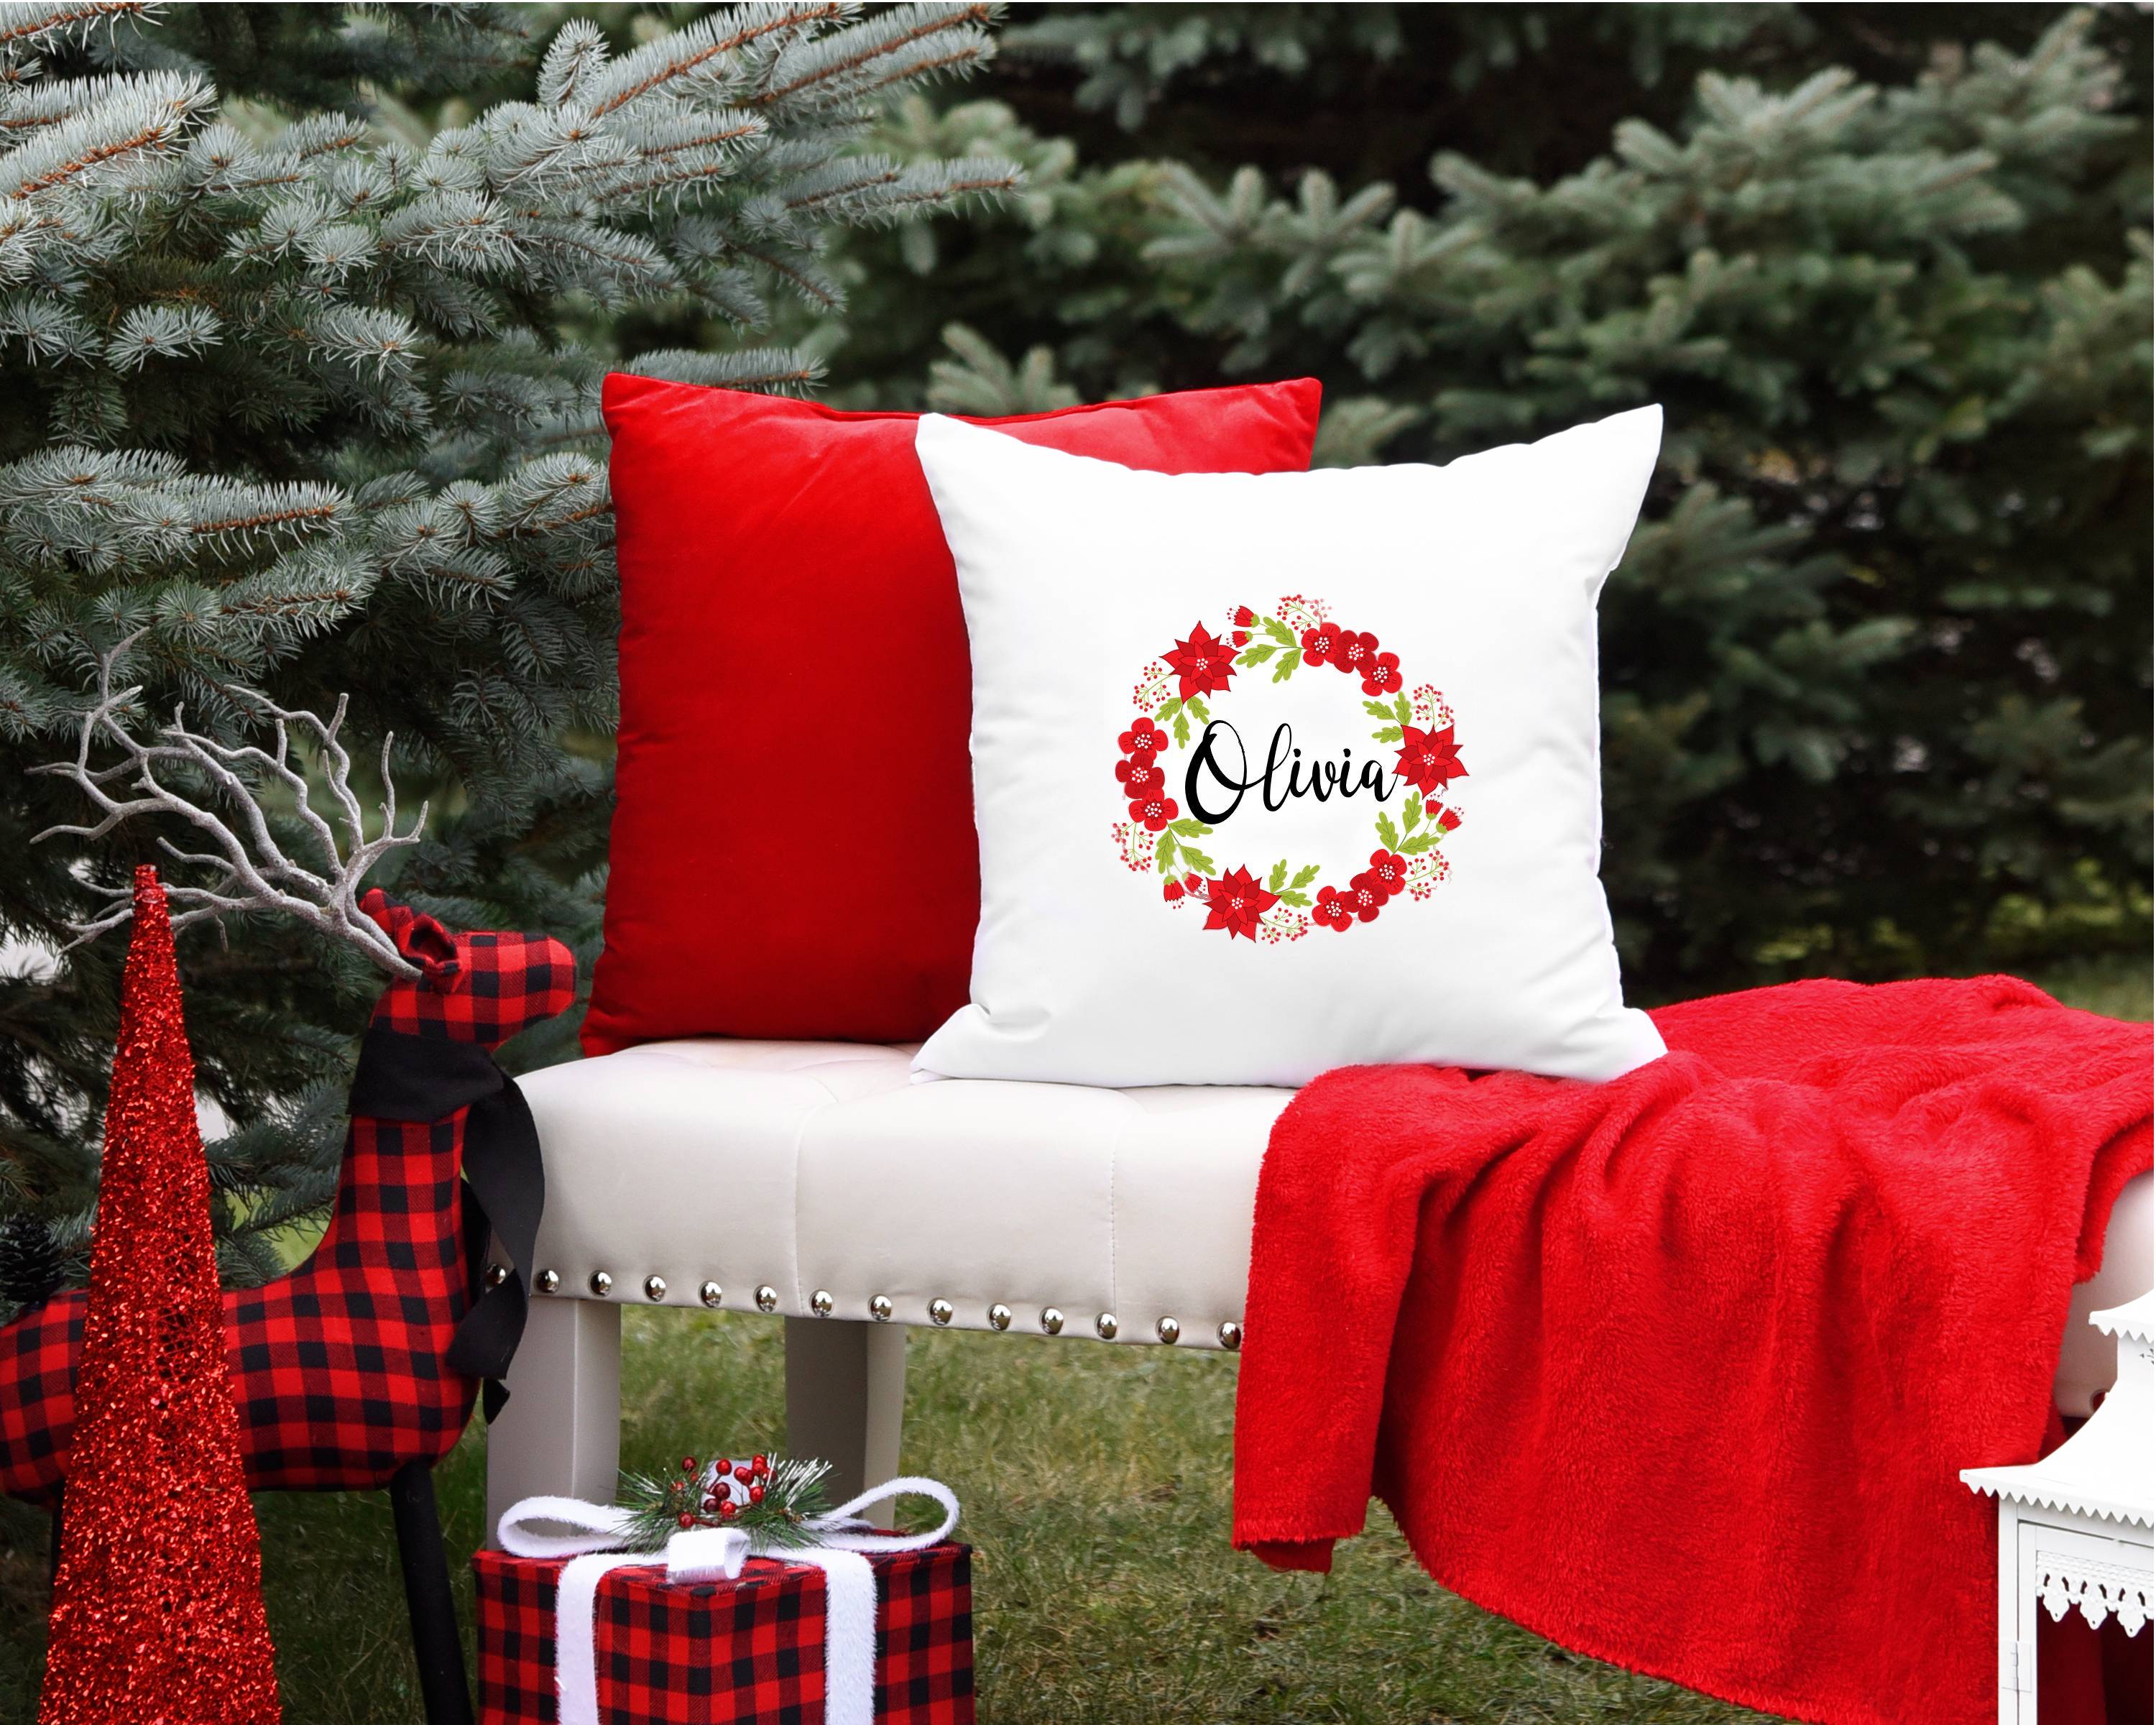 6 Reasons Why Custom Pillows Make Hilariously Perfect Christmas Gifts for Kids